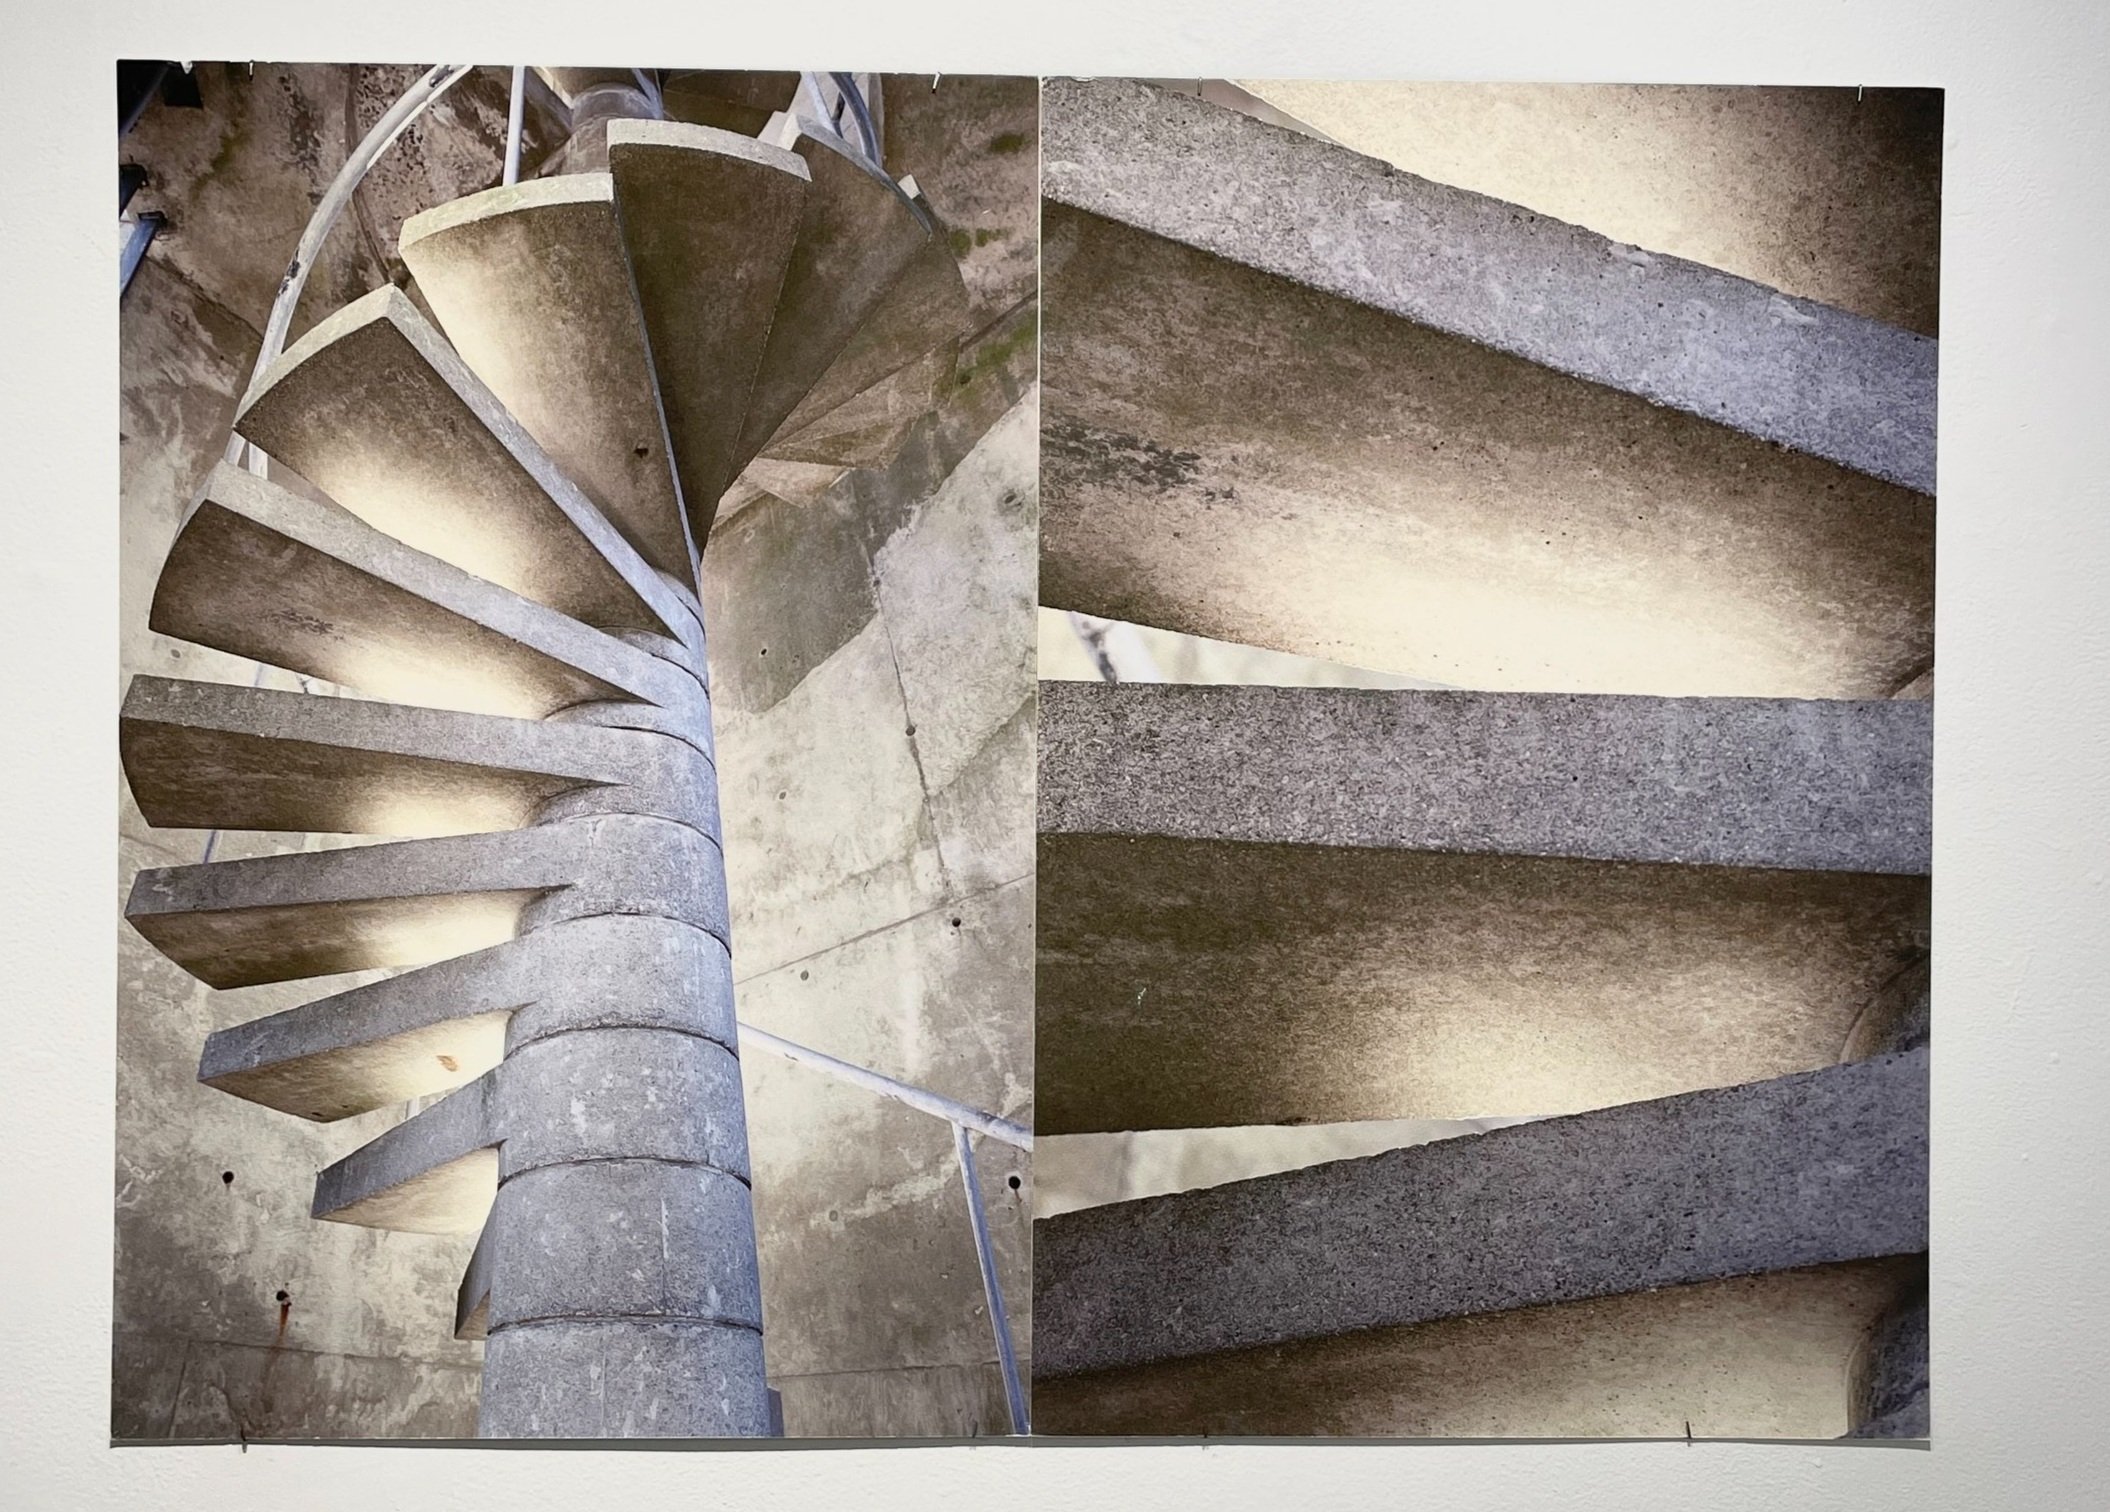  Beauty in the Beast&nbsp;  Viera Levitt  Photography of Brutalist Architecture (Left) UMass Dartmouth (Campanile - detail)  Photography of Brutalist Architecture (Right)  Digital Photography, 2018  $460 each     My photographs depict intimate, unnot